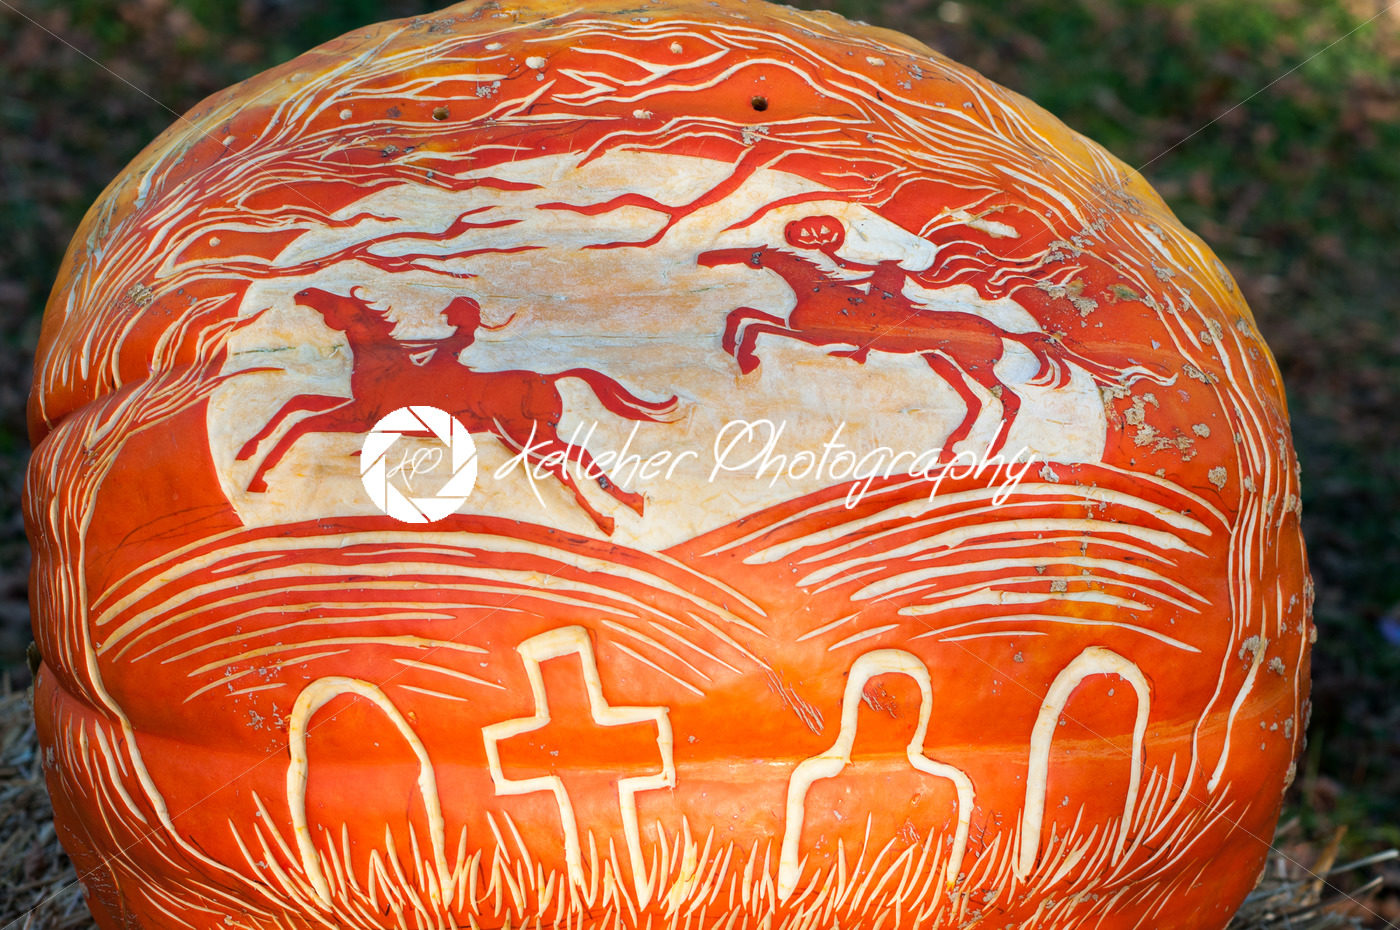 CHADDS FORD, PA – OCTOBER 26: Headless Horseman Pumpkin at The Great Pumpkin Carve carving contest on October 26, 2013 - Kelleher Photography Store